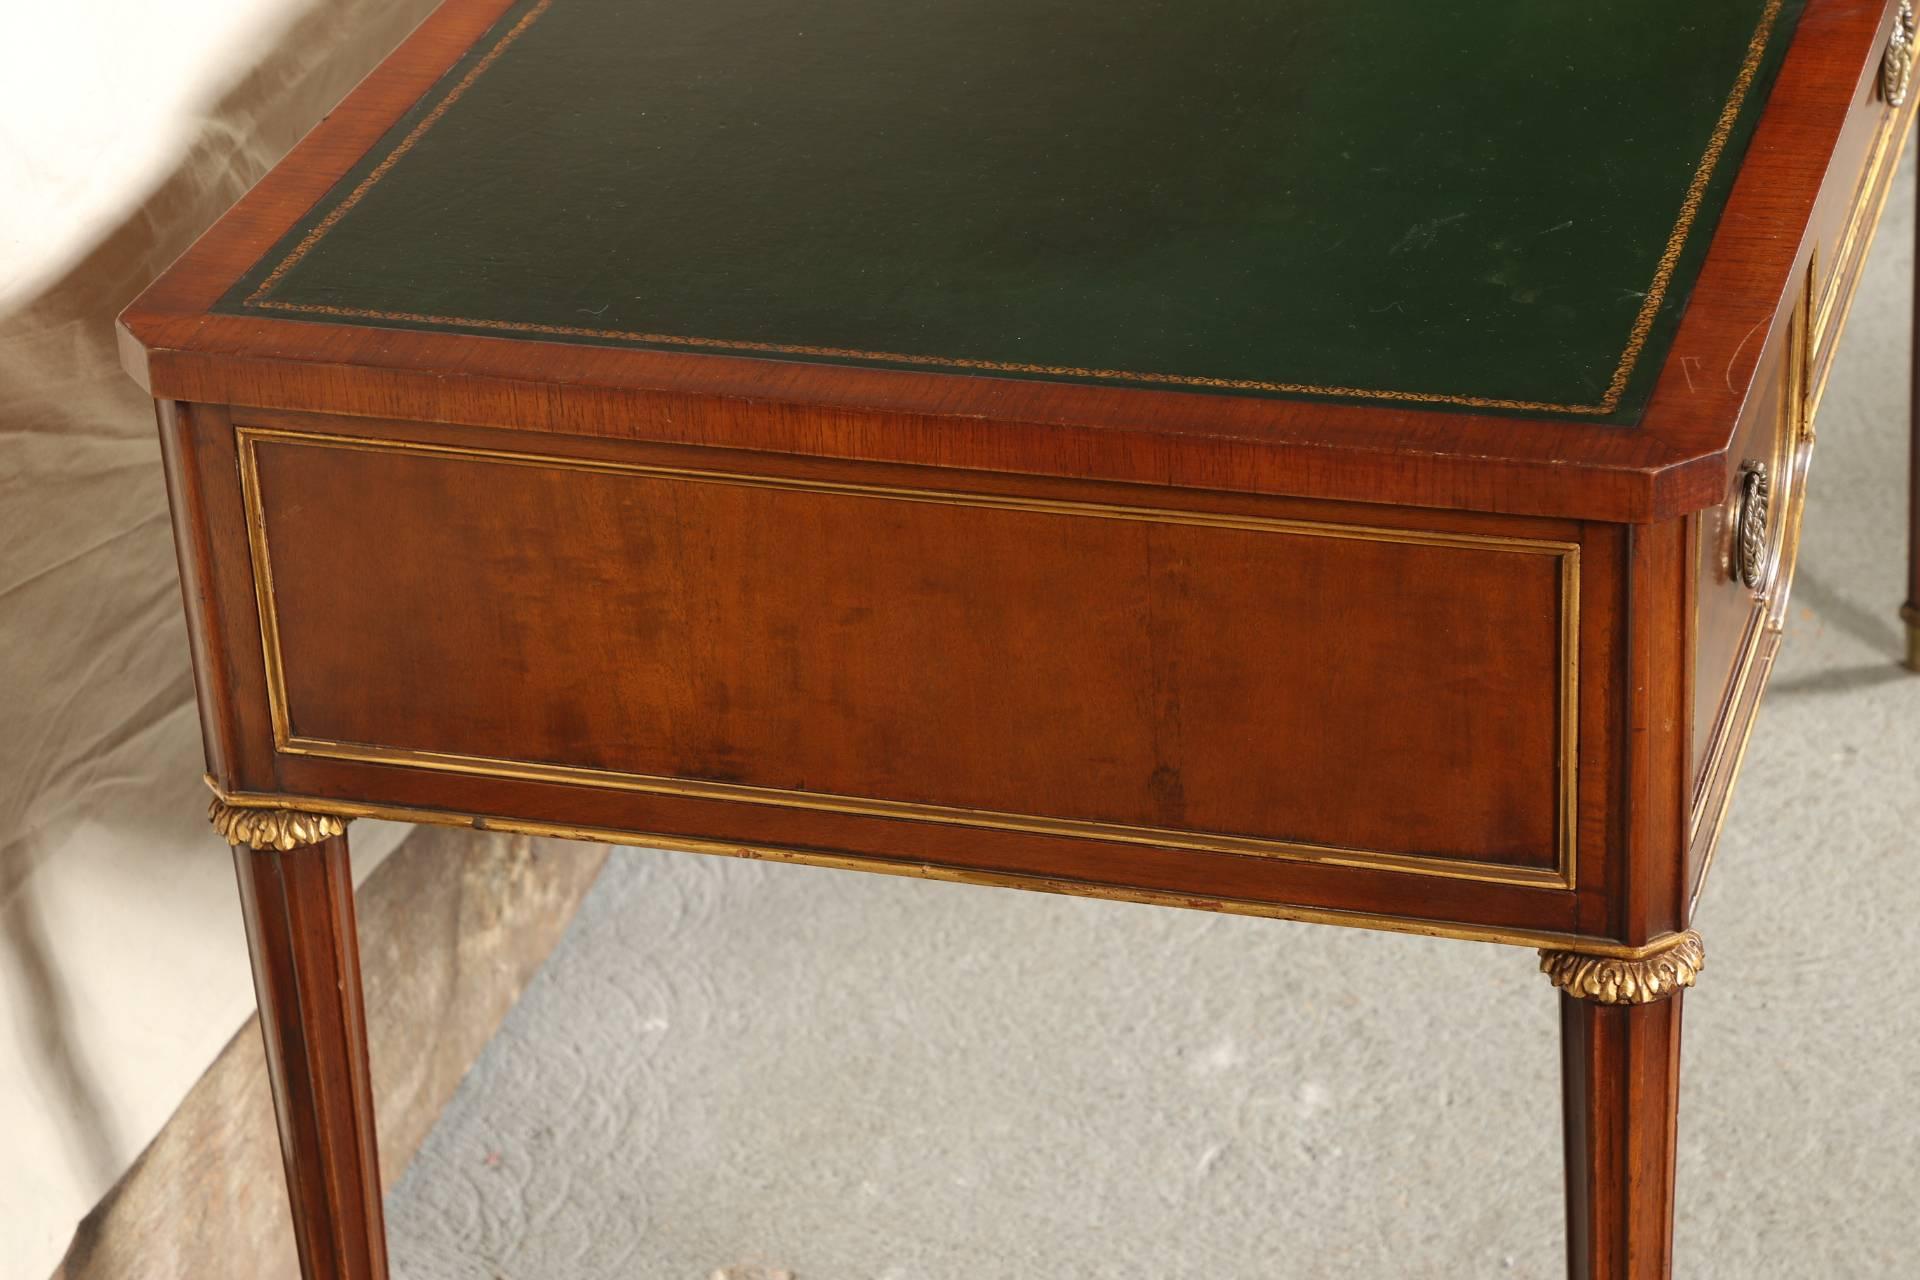 20th Century Quality Walnut and Rosewood Empire Style Desk